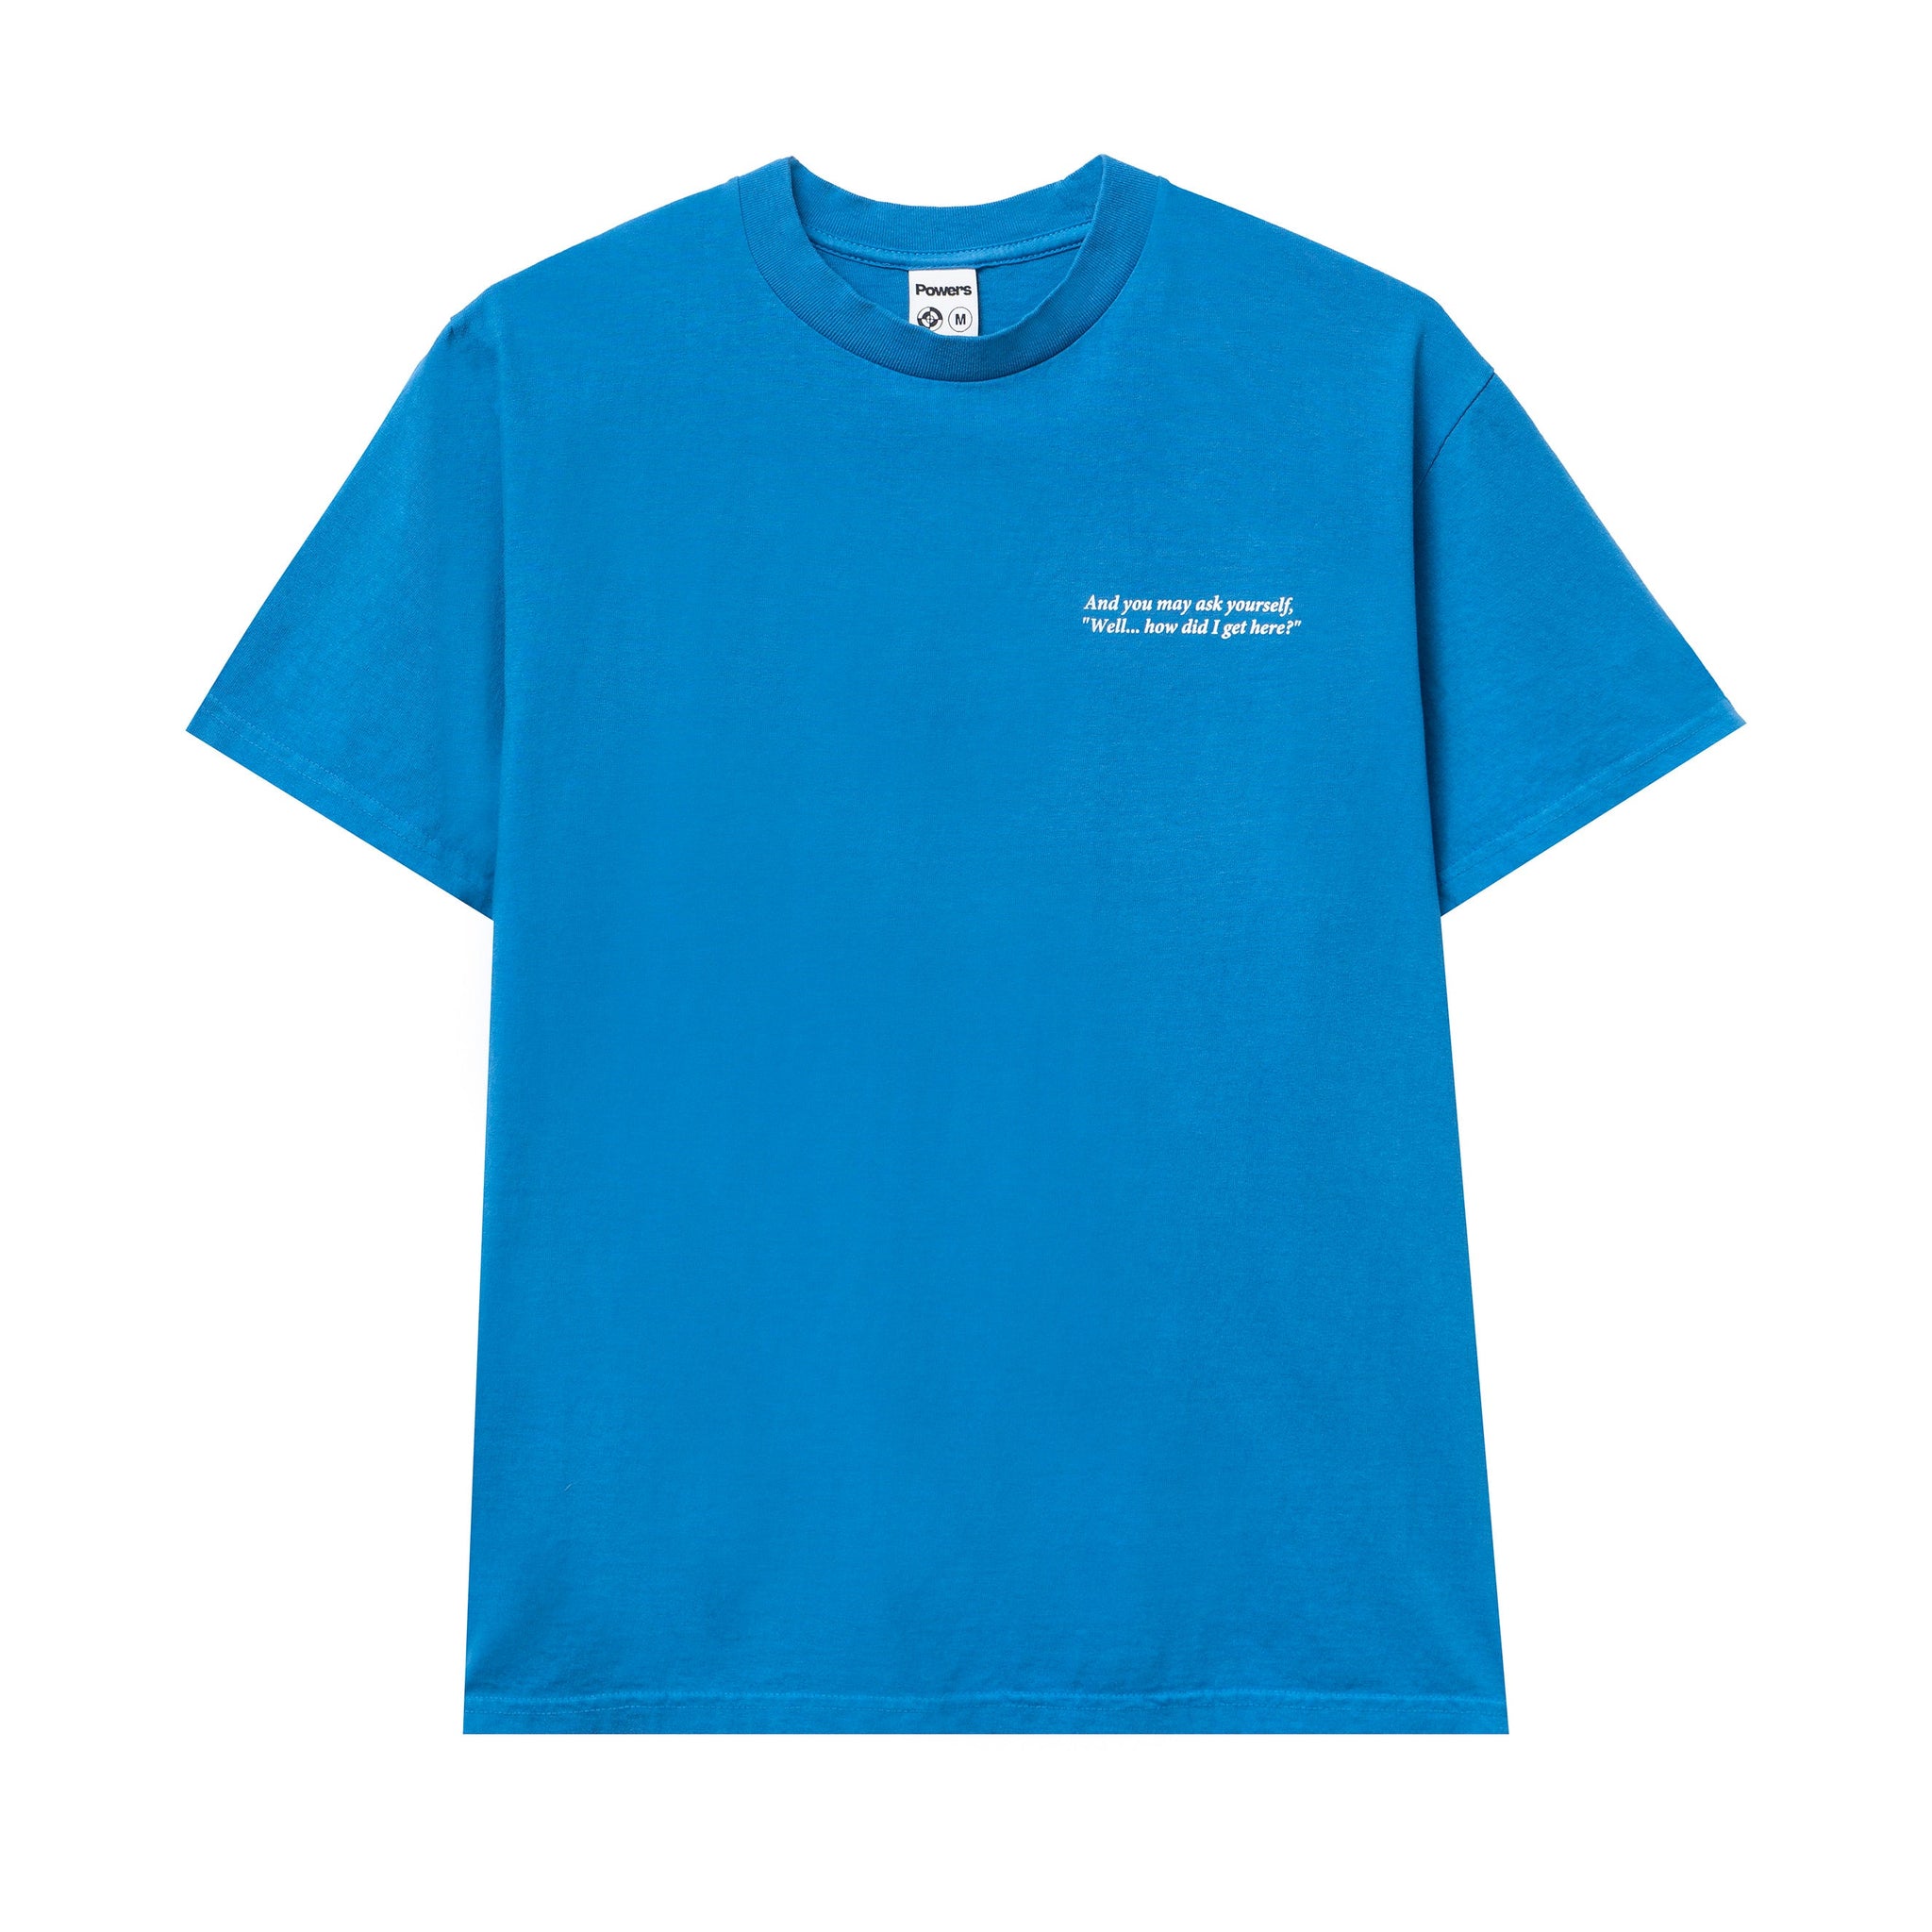 Real World S/S Tee - Blue